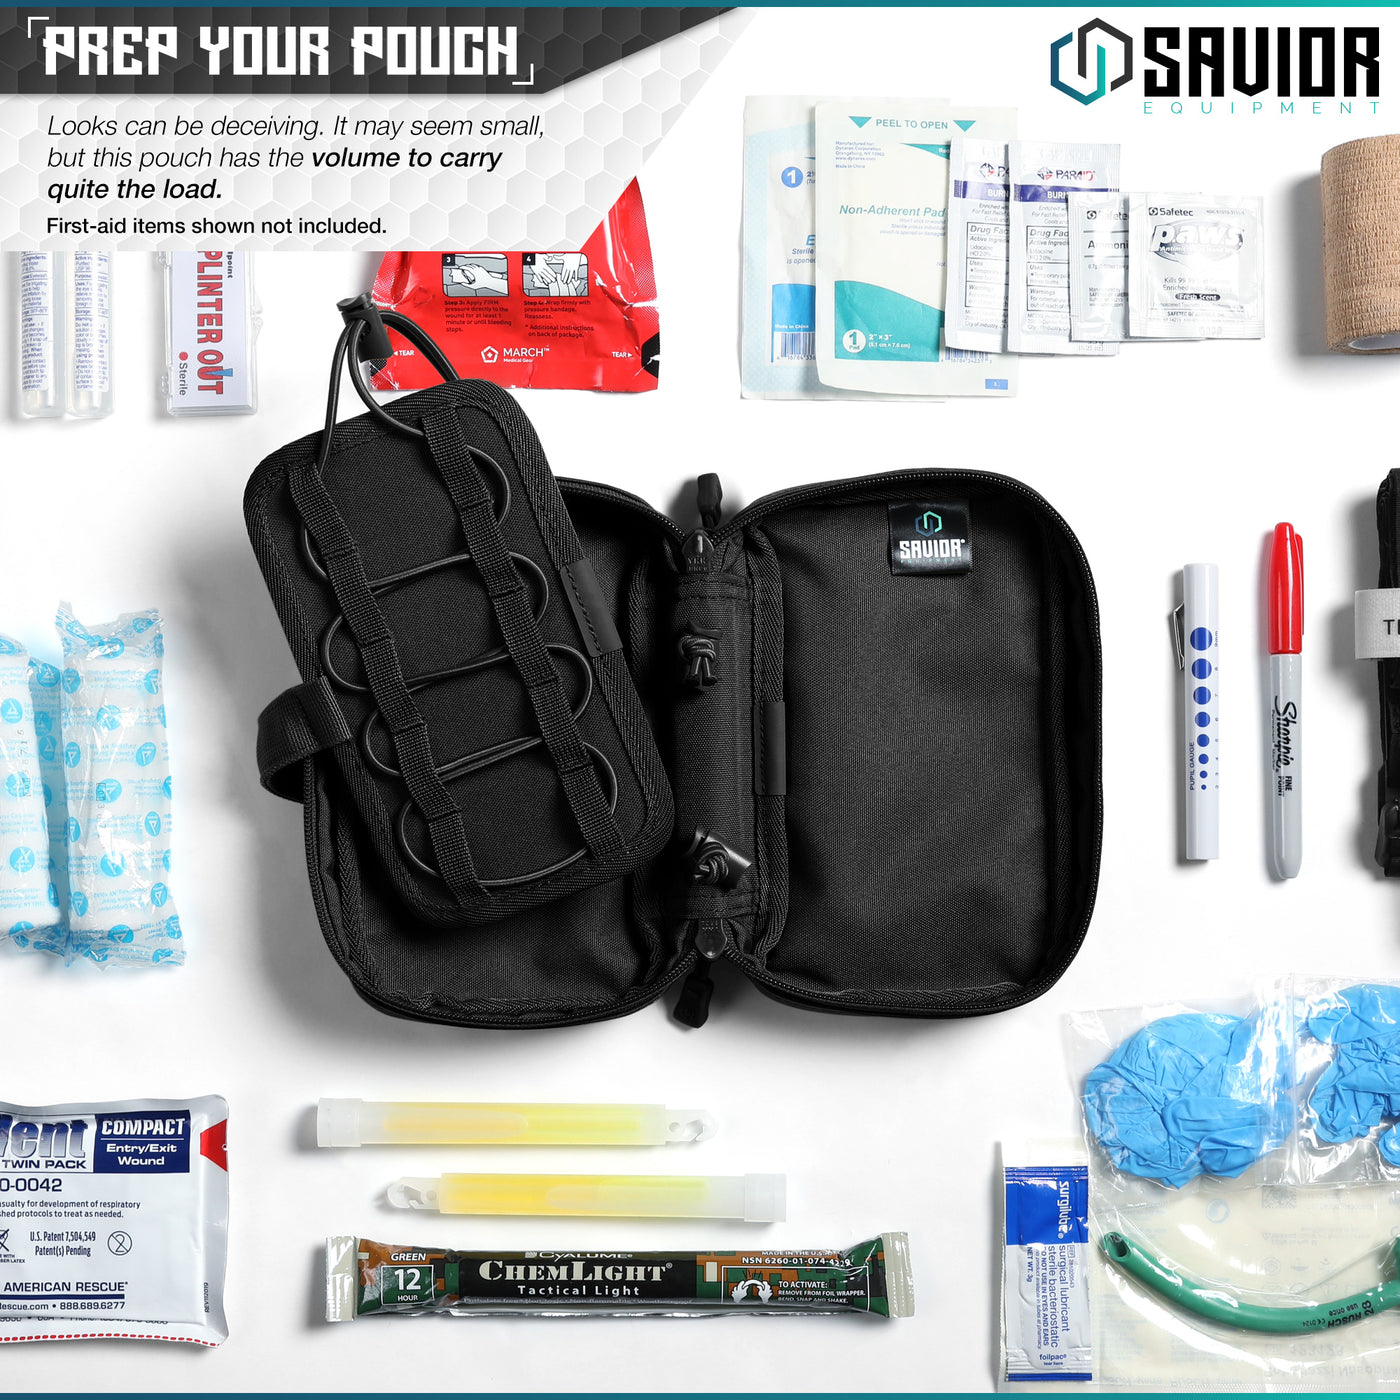 Prep Your Pouch - Looks can be deceiving. It may seem small, but this pouch has the volume to carry quite the load. It may seem small, but this pouch has the volume to carry quite the load. First-aid items shown not included.